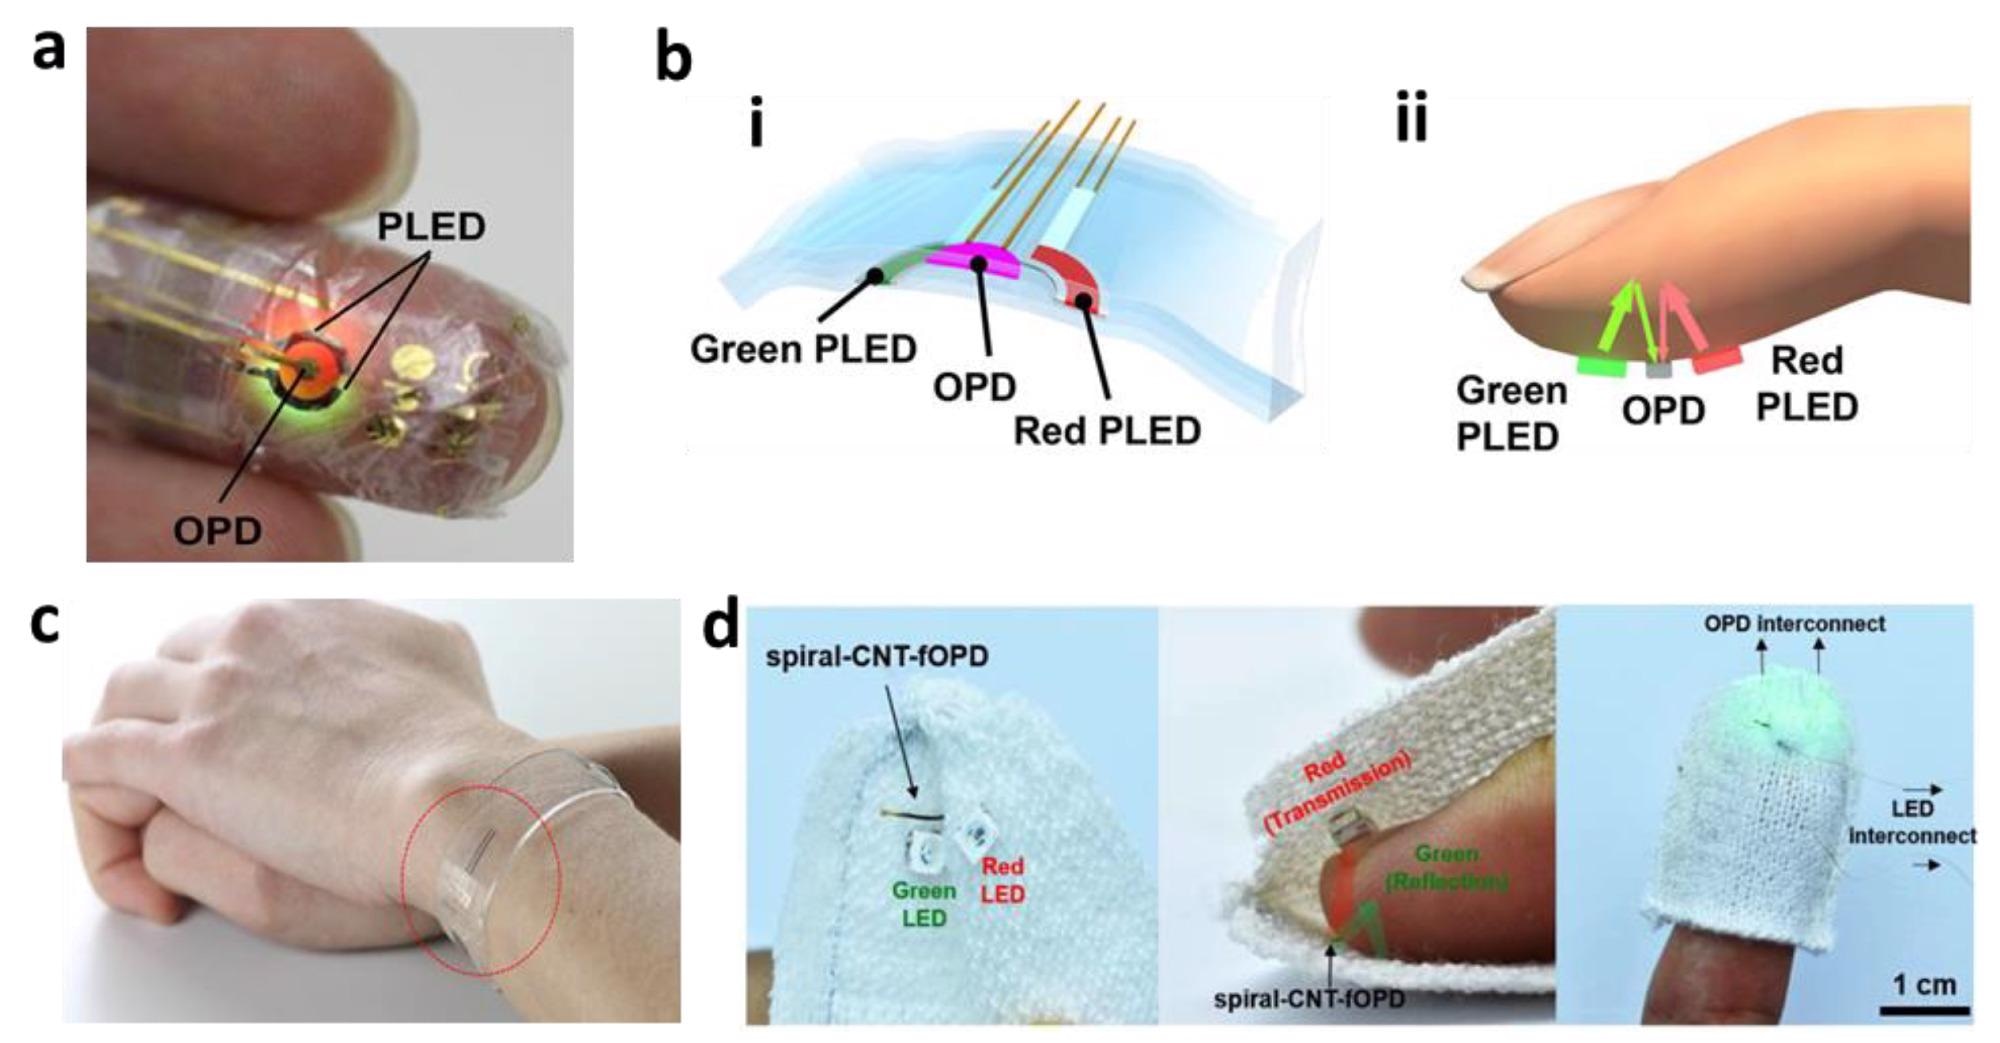 Photoplethysmography. (a) Photo of an ultra-flexible organic optical sensor. (b) Illustration of polymer LED (i) and organic photodiode (ii) pulse oximeters. (c) Photo of a graphene-based flexible sensor in a heart-rate monitoring bracelet. (d) Photos of CNT-based microelectrodes for a fiber optoelectronic device.